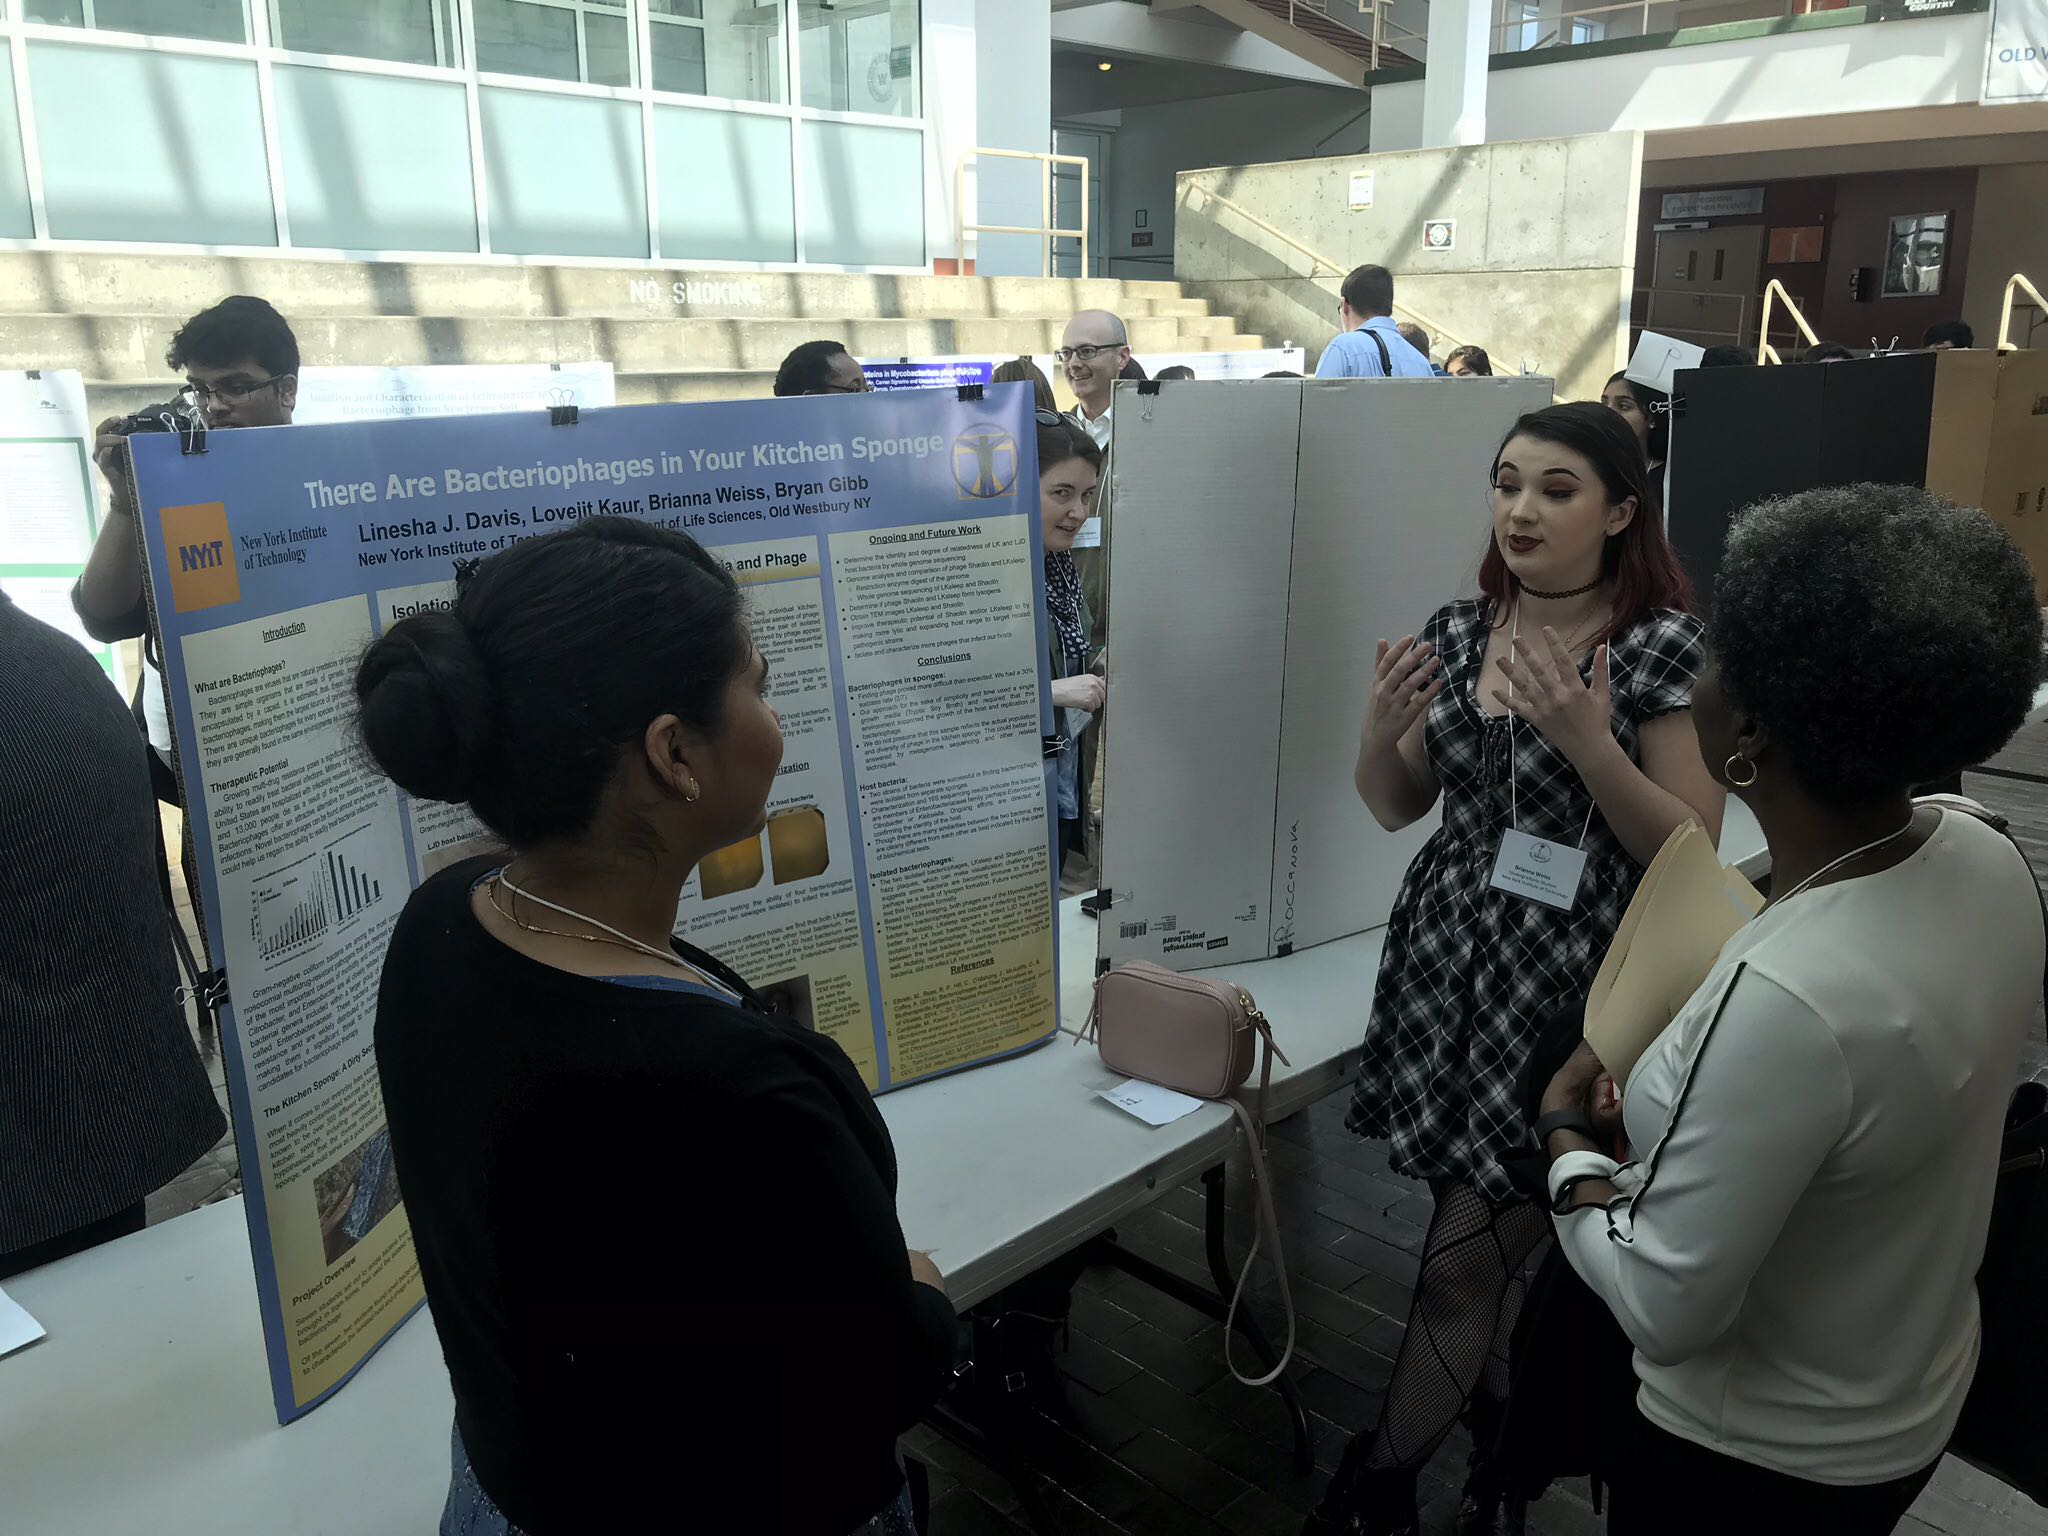 Lovejit Kaur and Brianna Weiss present their work on bacteriophages isolated from kitchen sponges at the NYC SEA-PHAGE symposium